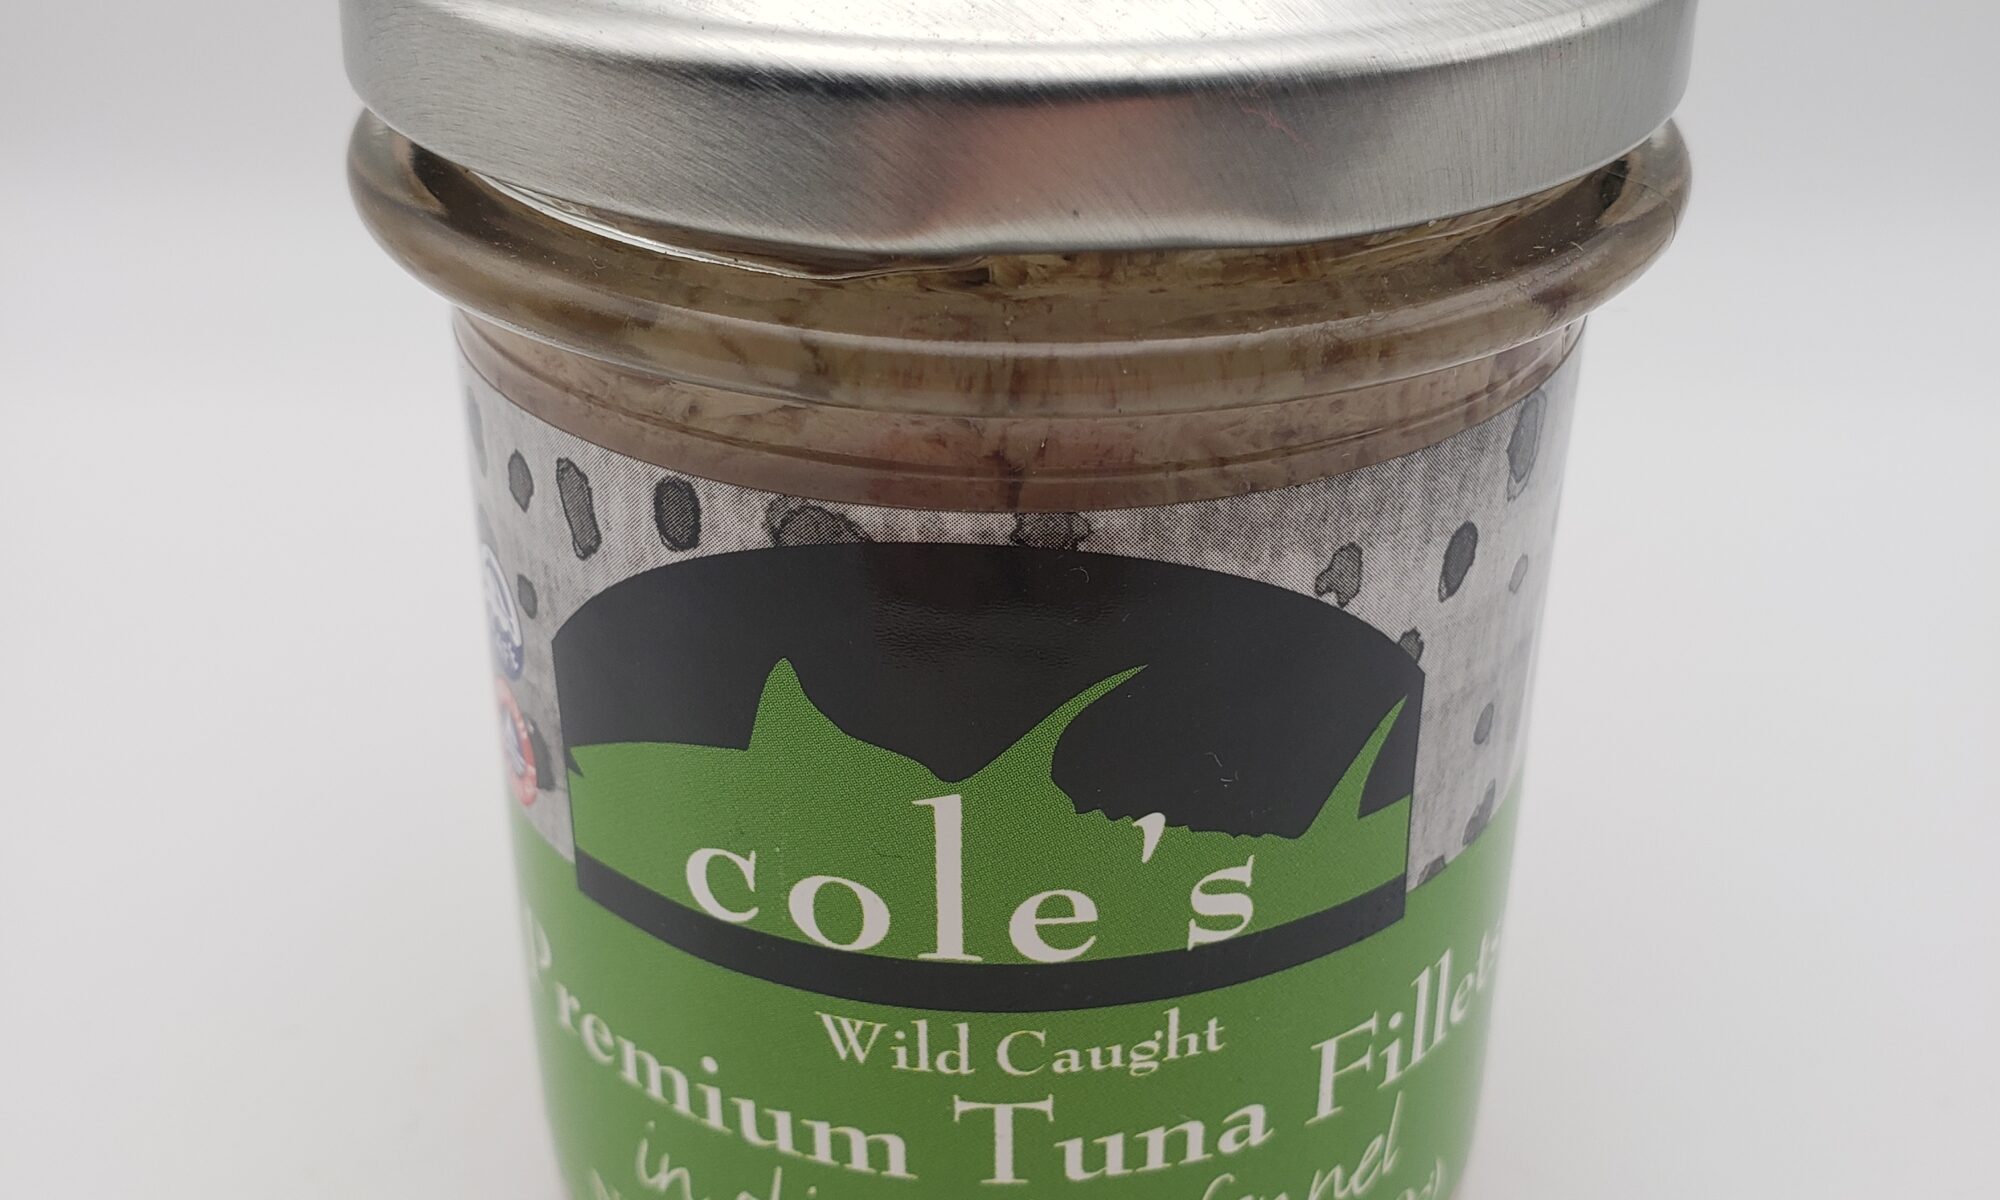 Image of Cole's tuna with fennel jar